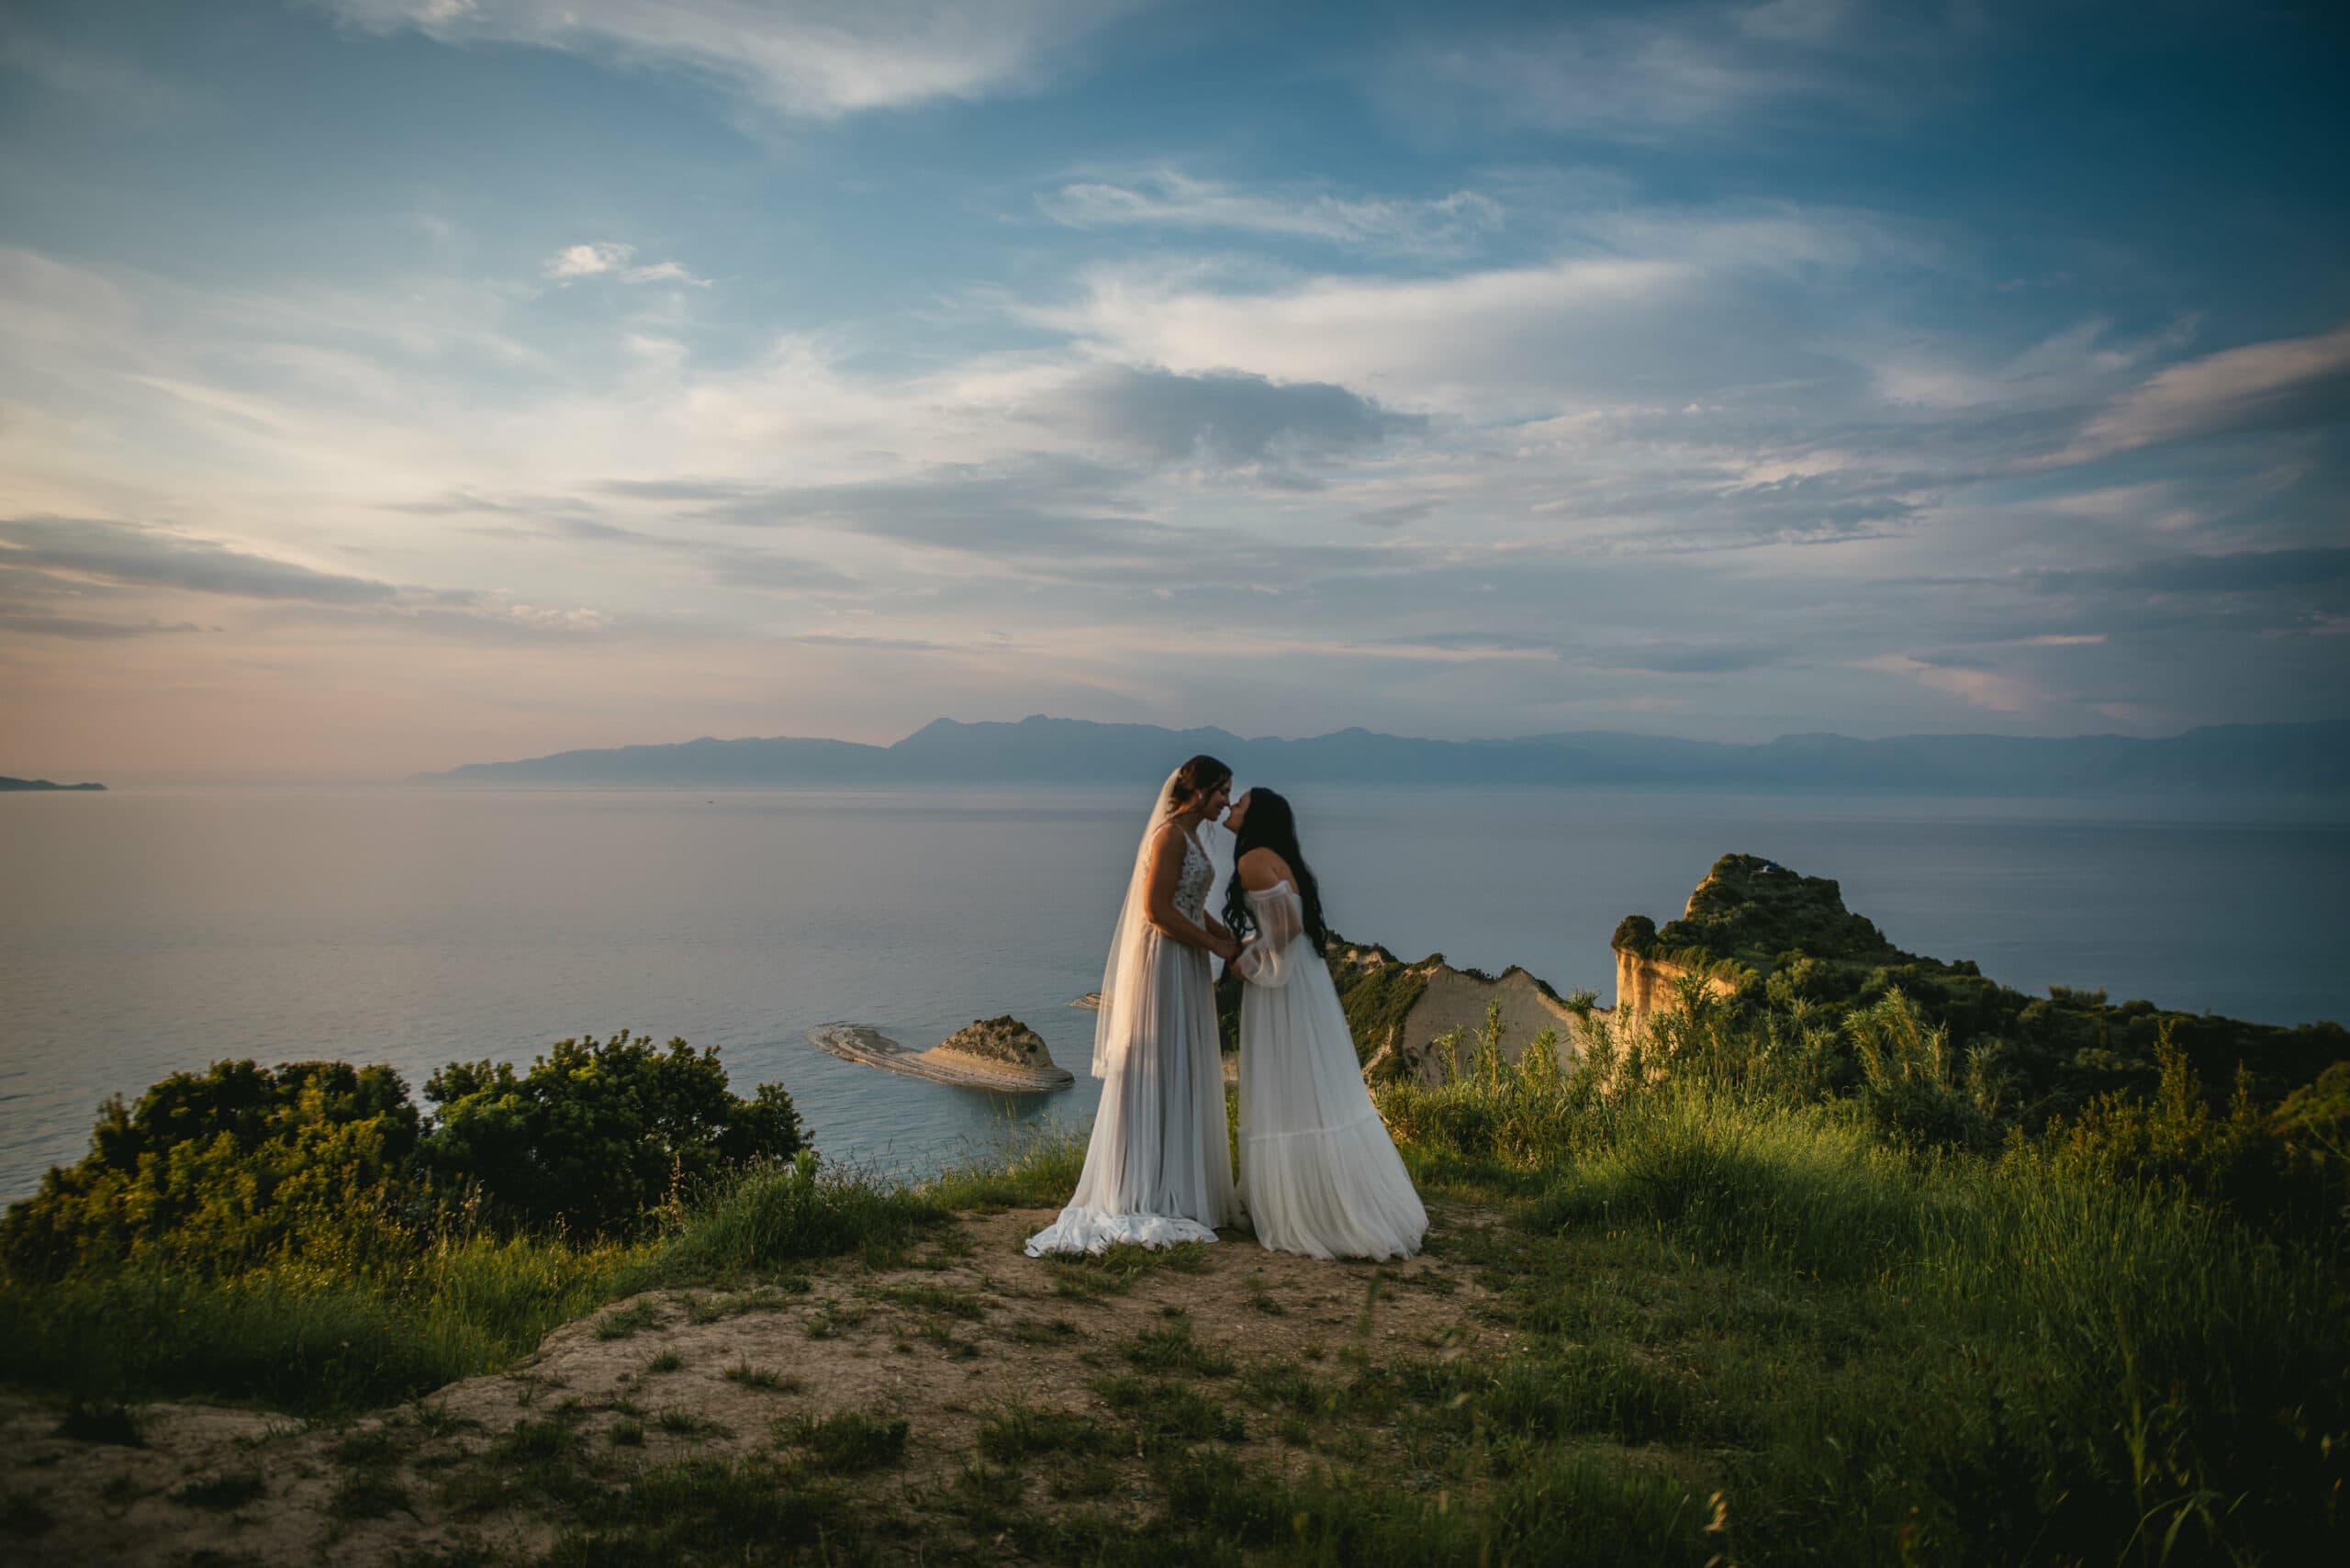 A shared glance full of promise and emotion during the Corfu elopement ceremony.